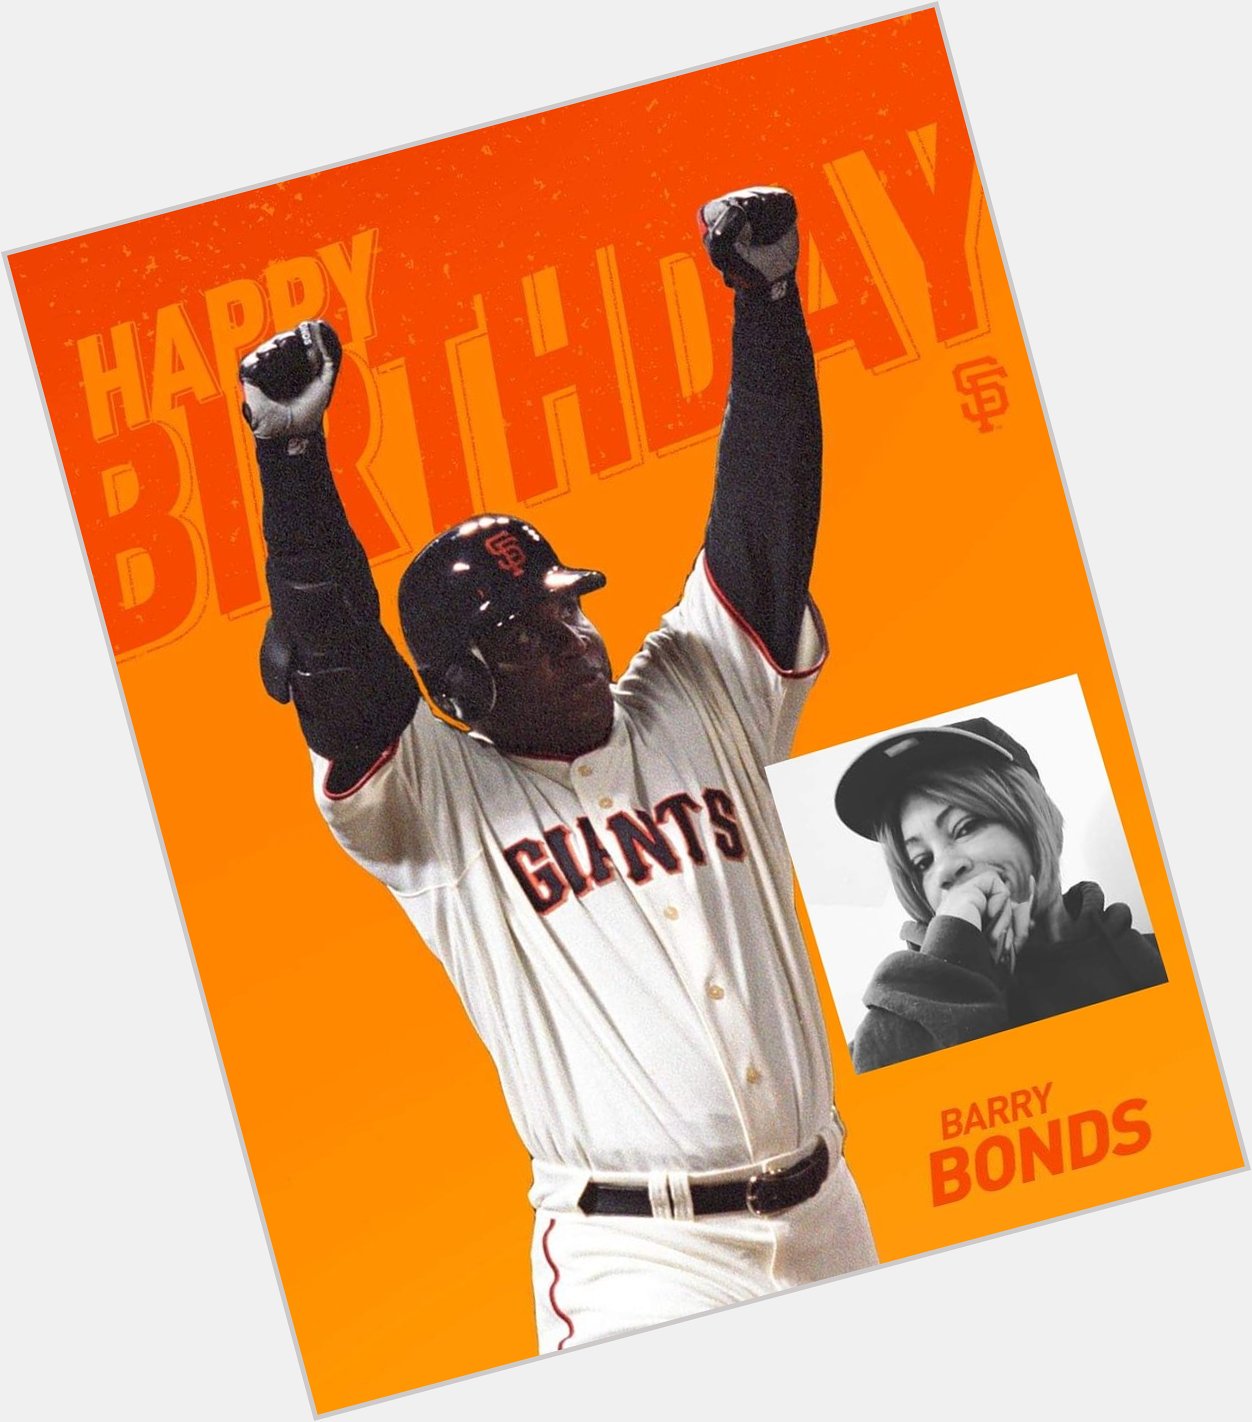 Happy Birthday to Barry Bonds! I used to work at the ballpark. Met him in person! 